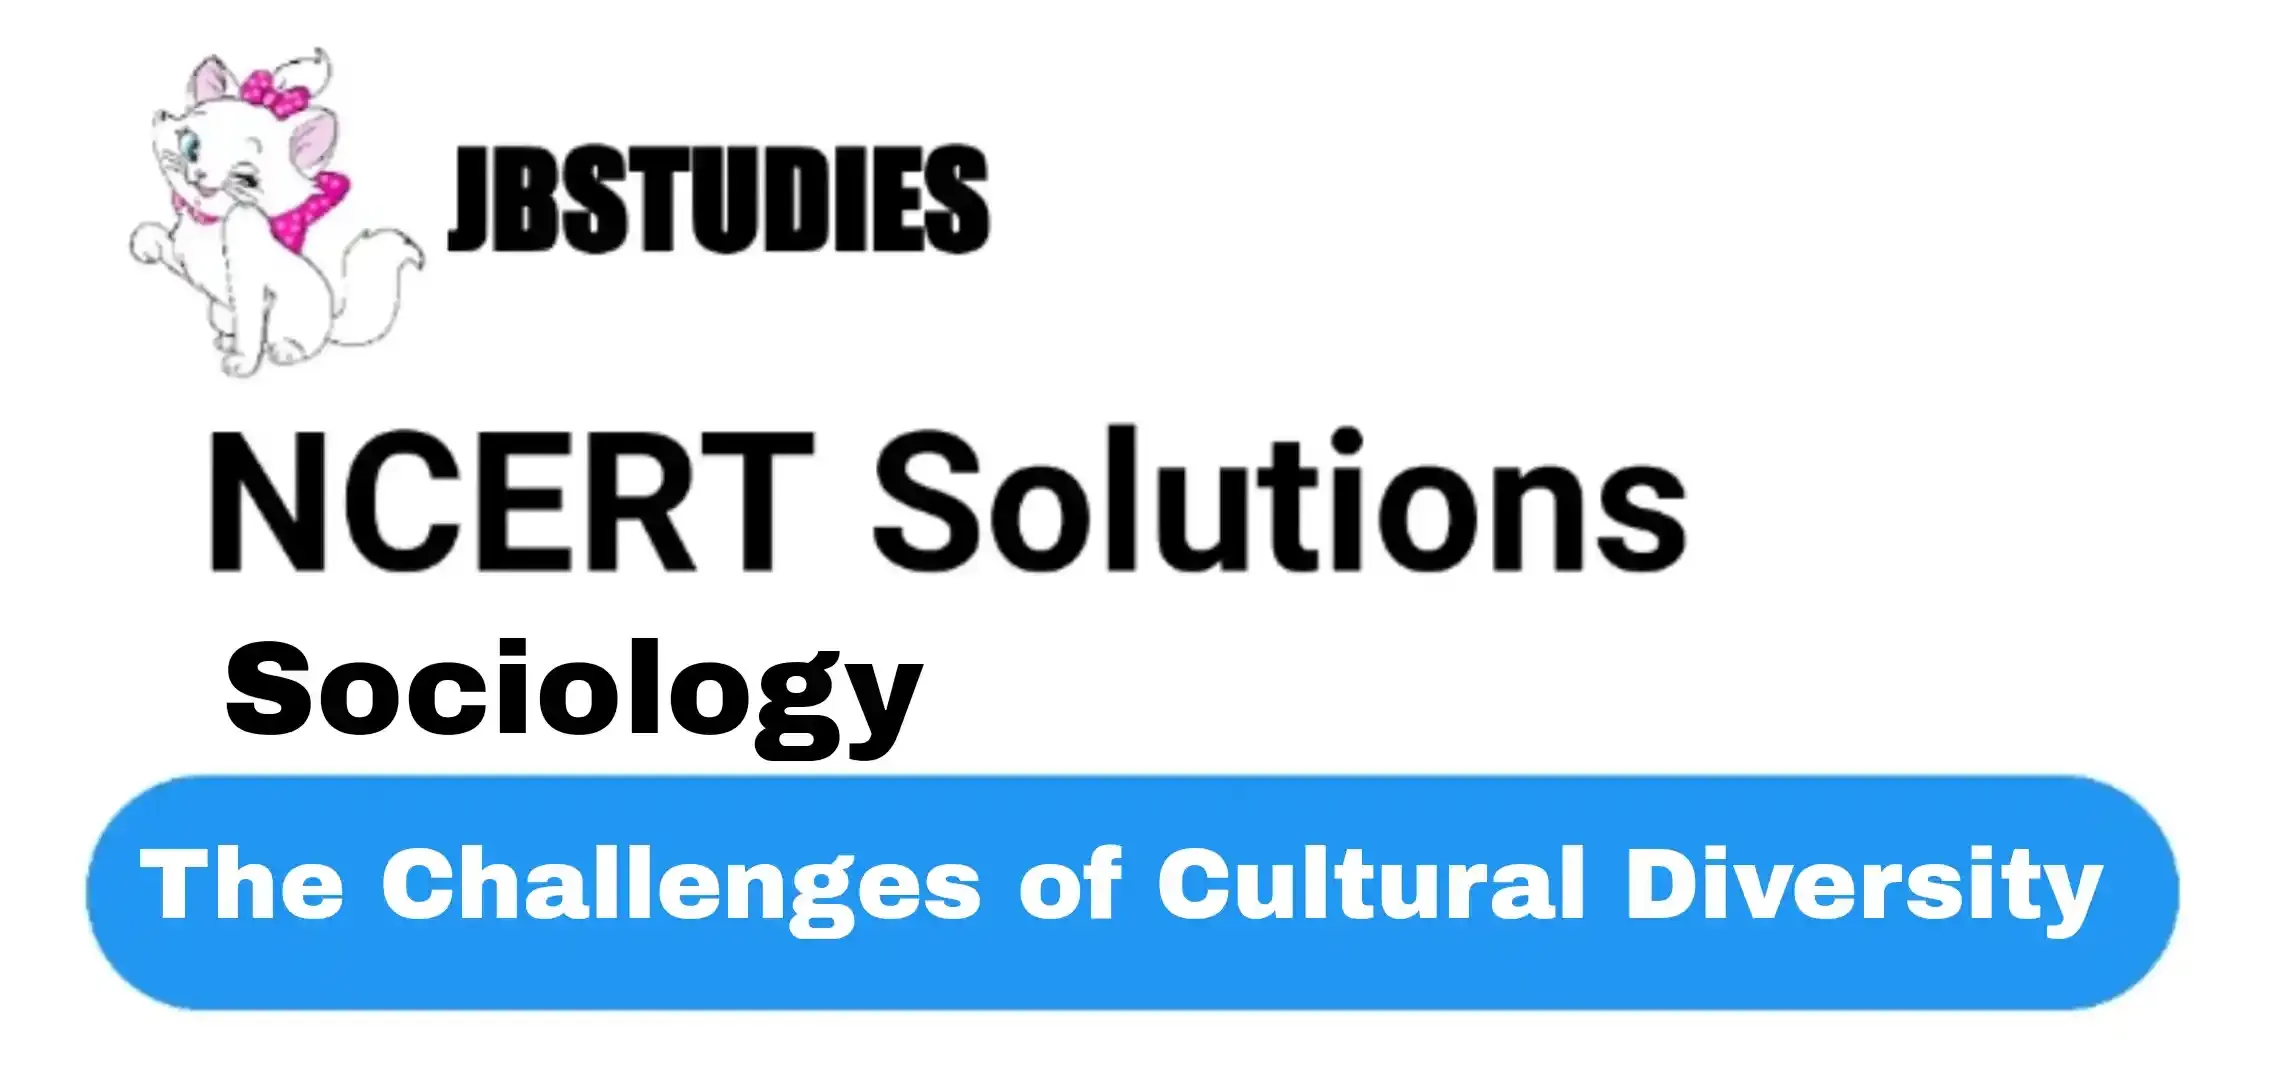 Solutions Class 12 Sociology Chapter -6 (The Challenges of Cultural Diversity)